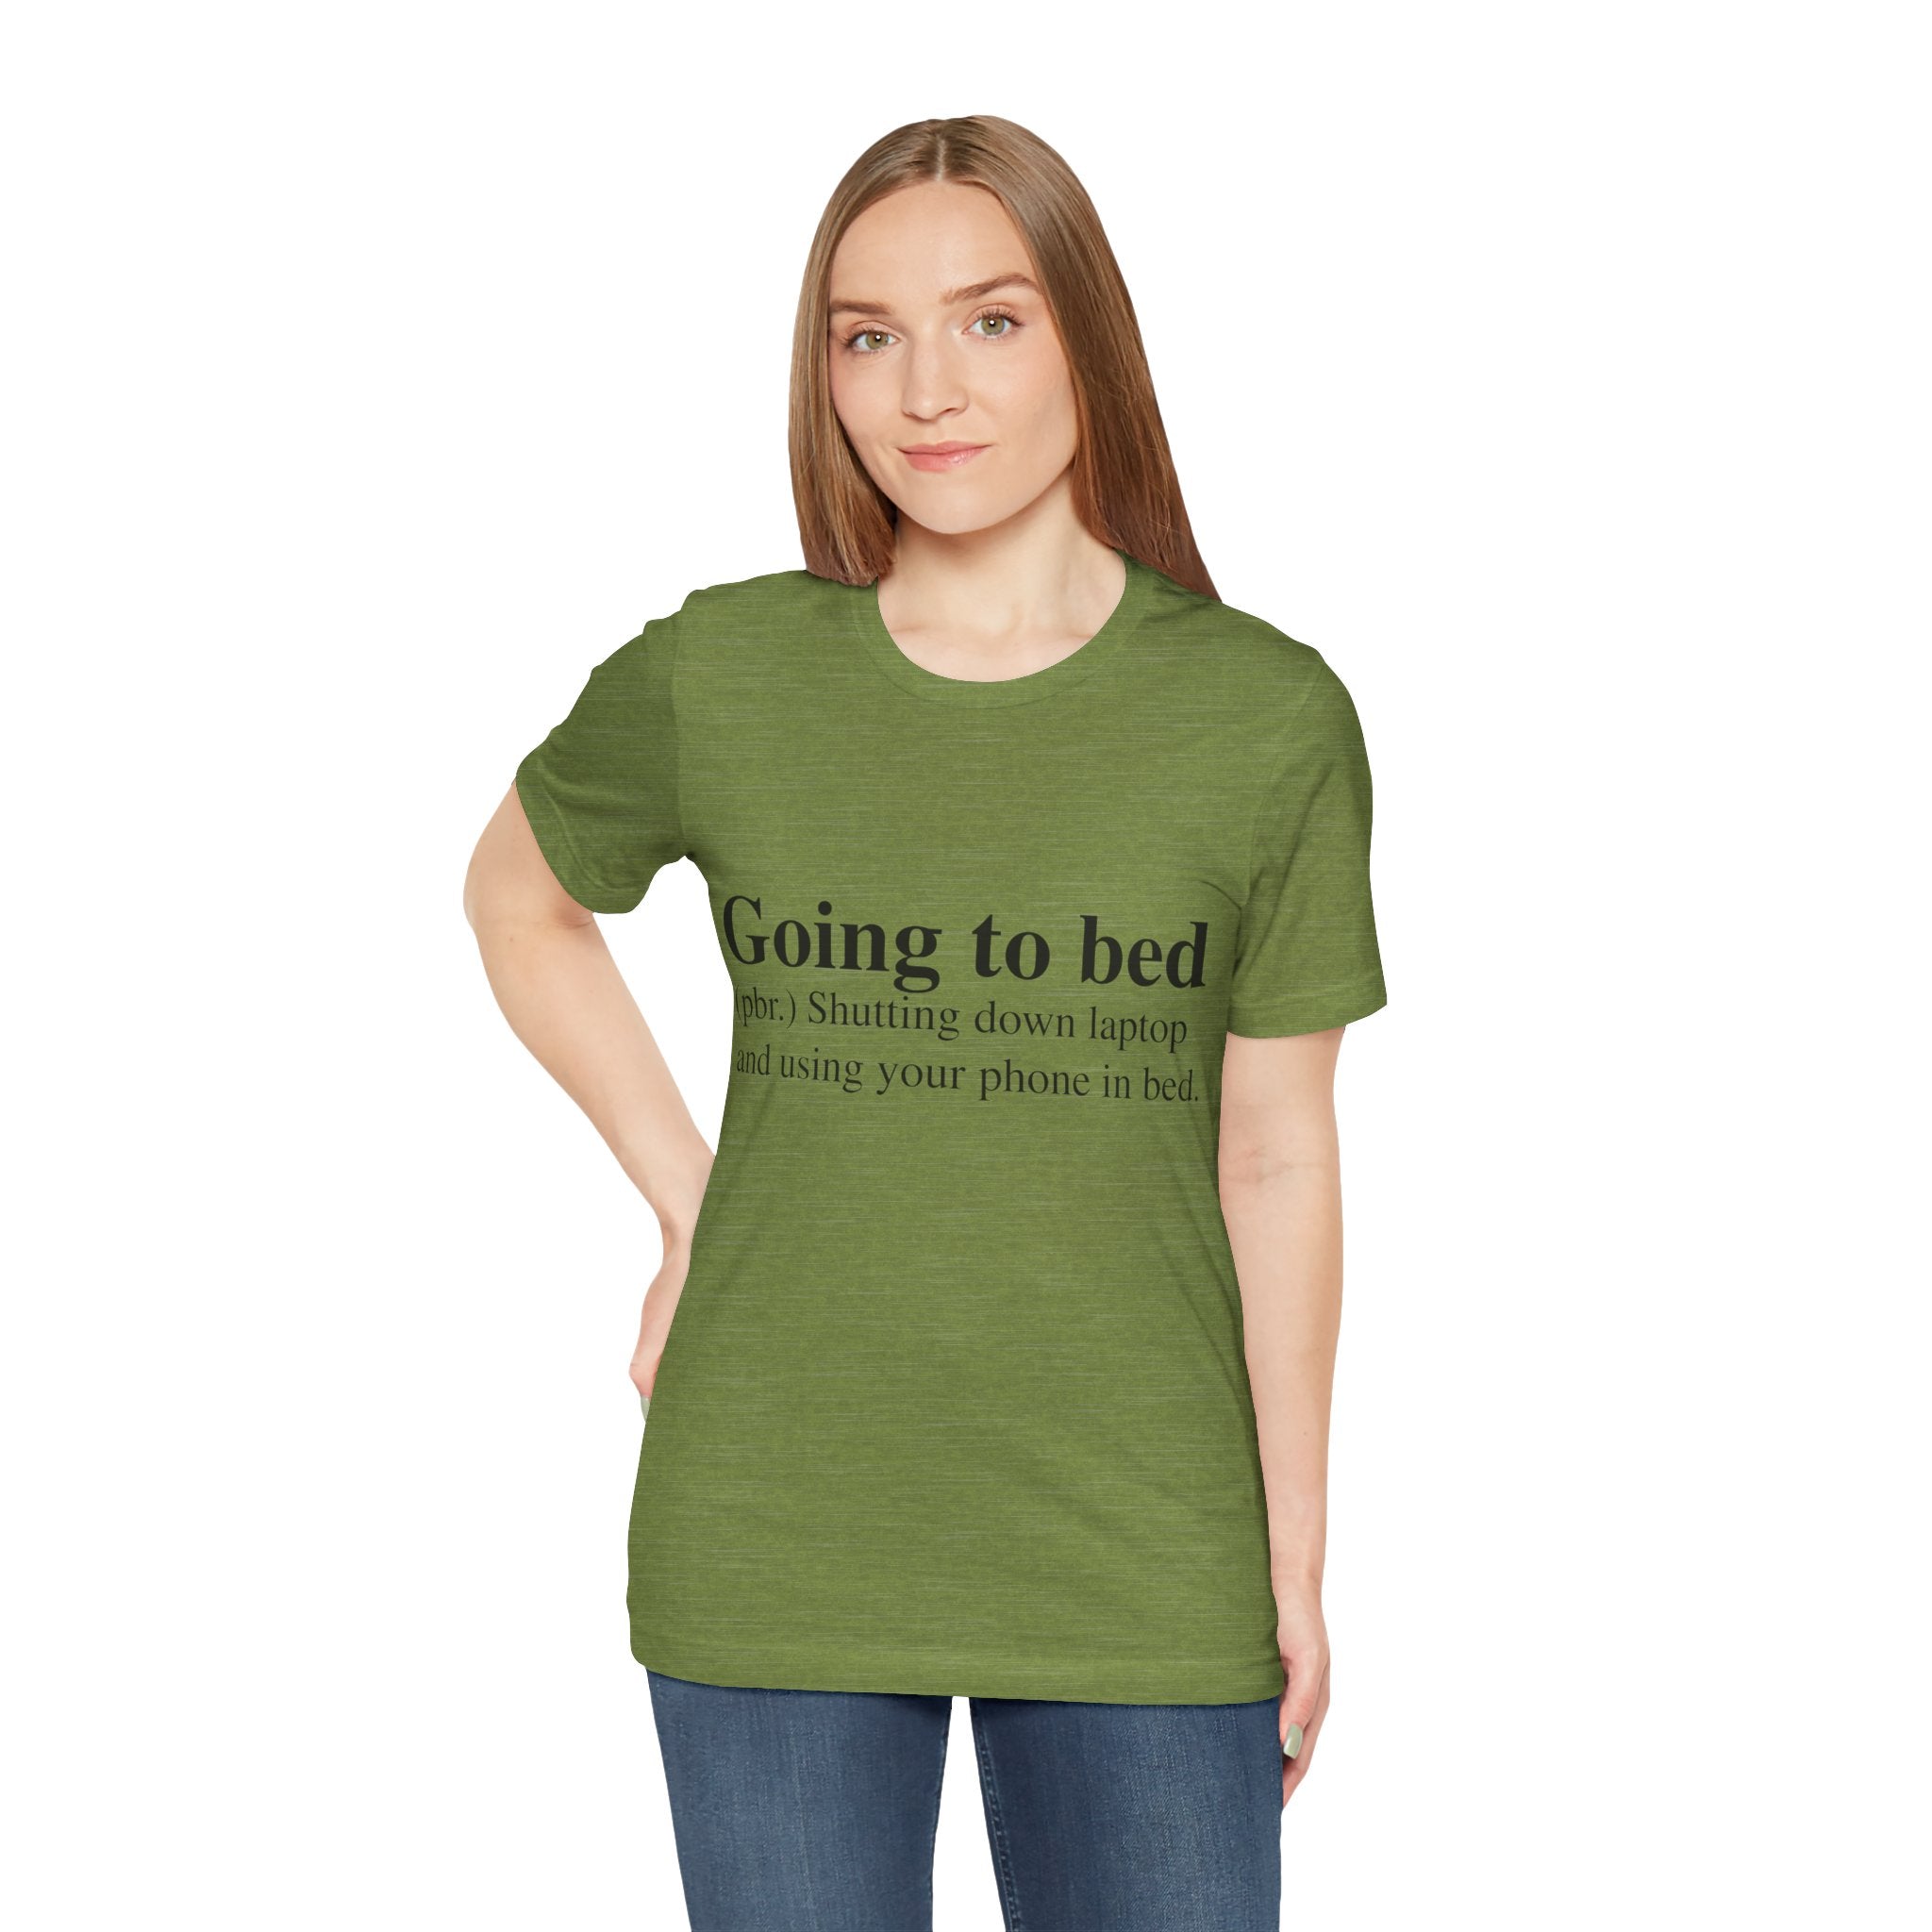 Woman in a green Going to Bed T-Shirt with text, "going to bed (n): shutting down laptop and not using your phone in bed," standing against a white background.